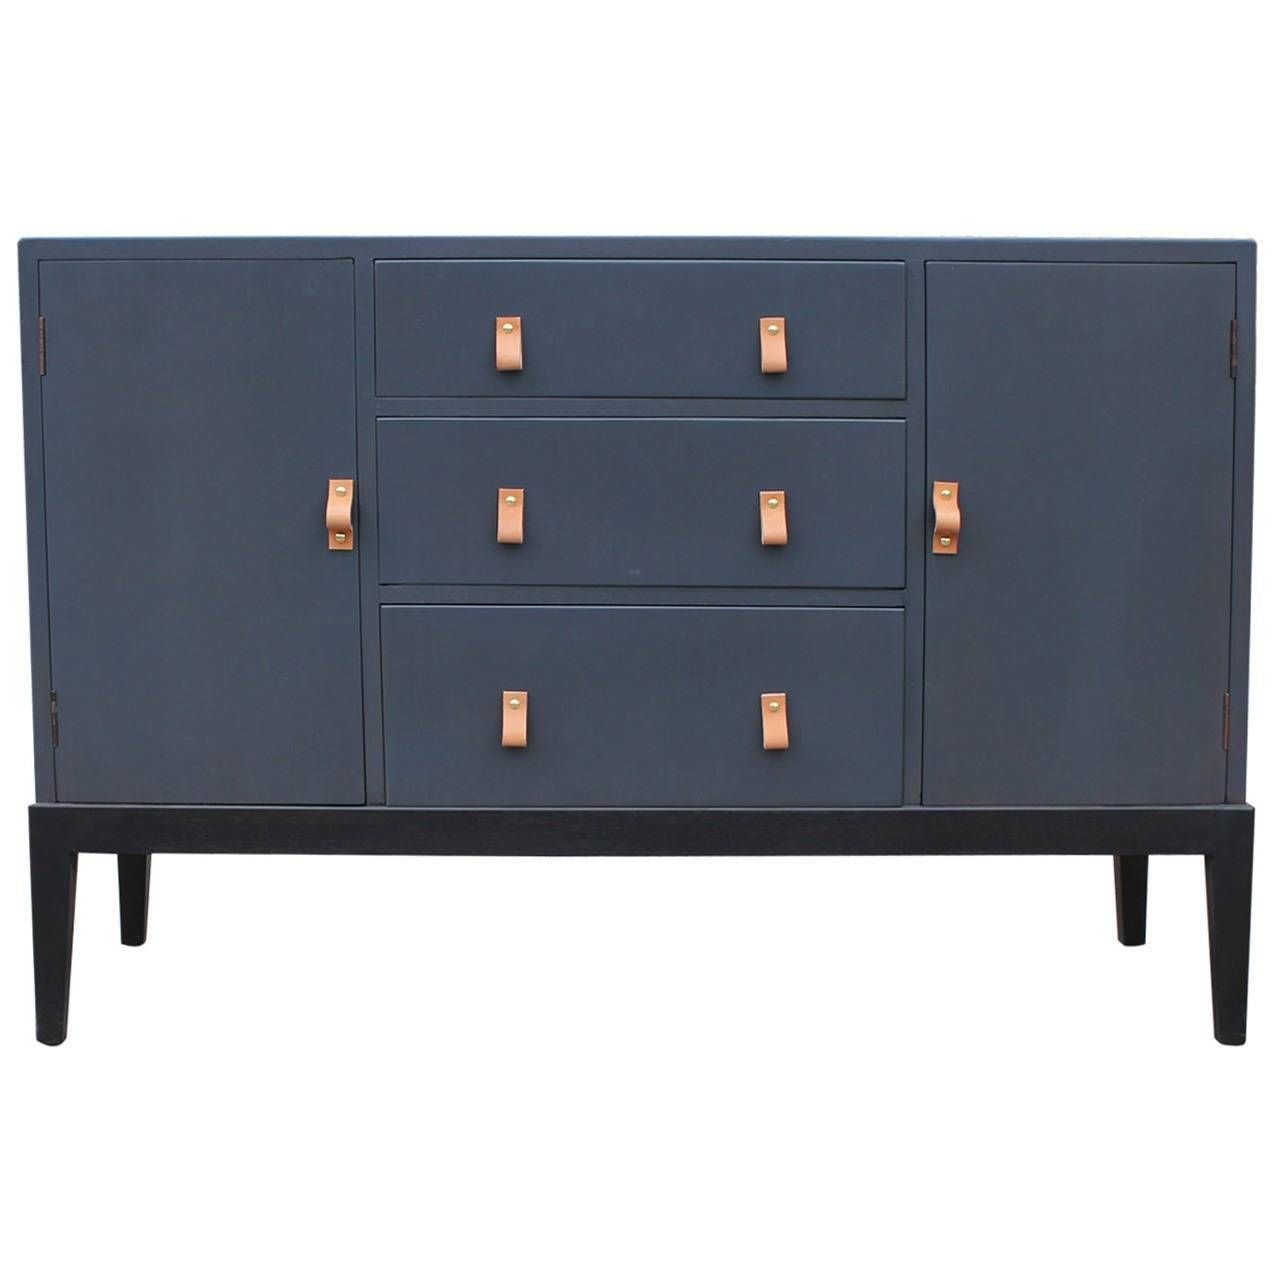 Superb Grey Sideboard Or Buffet With Leather Handles At 1stdibs Regarding Grey Sideboard (Photo 14 of 20)